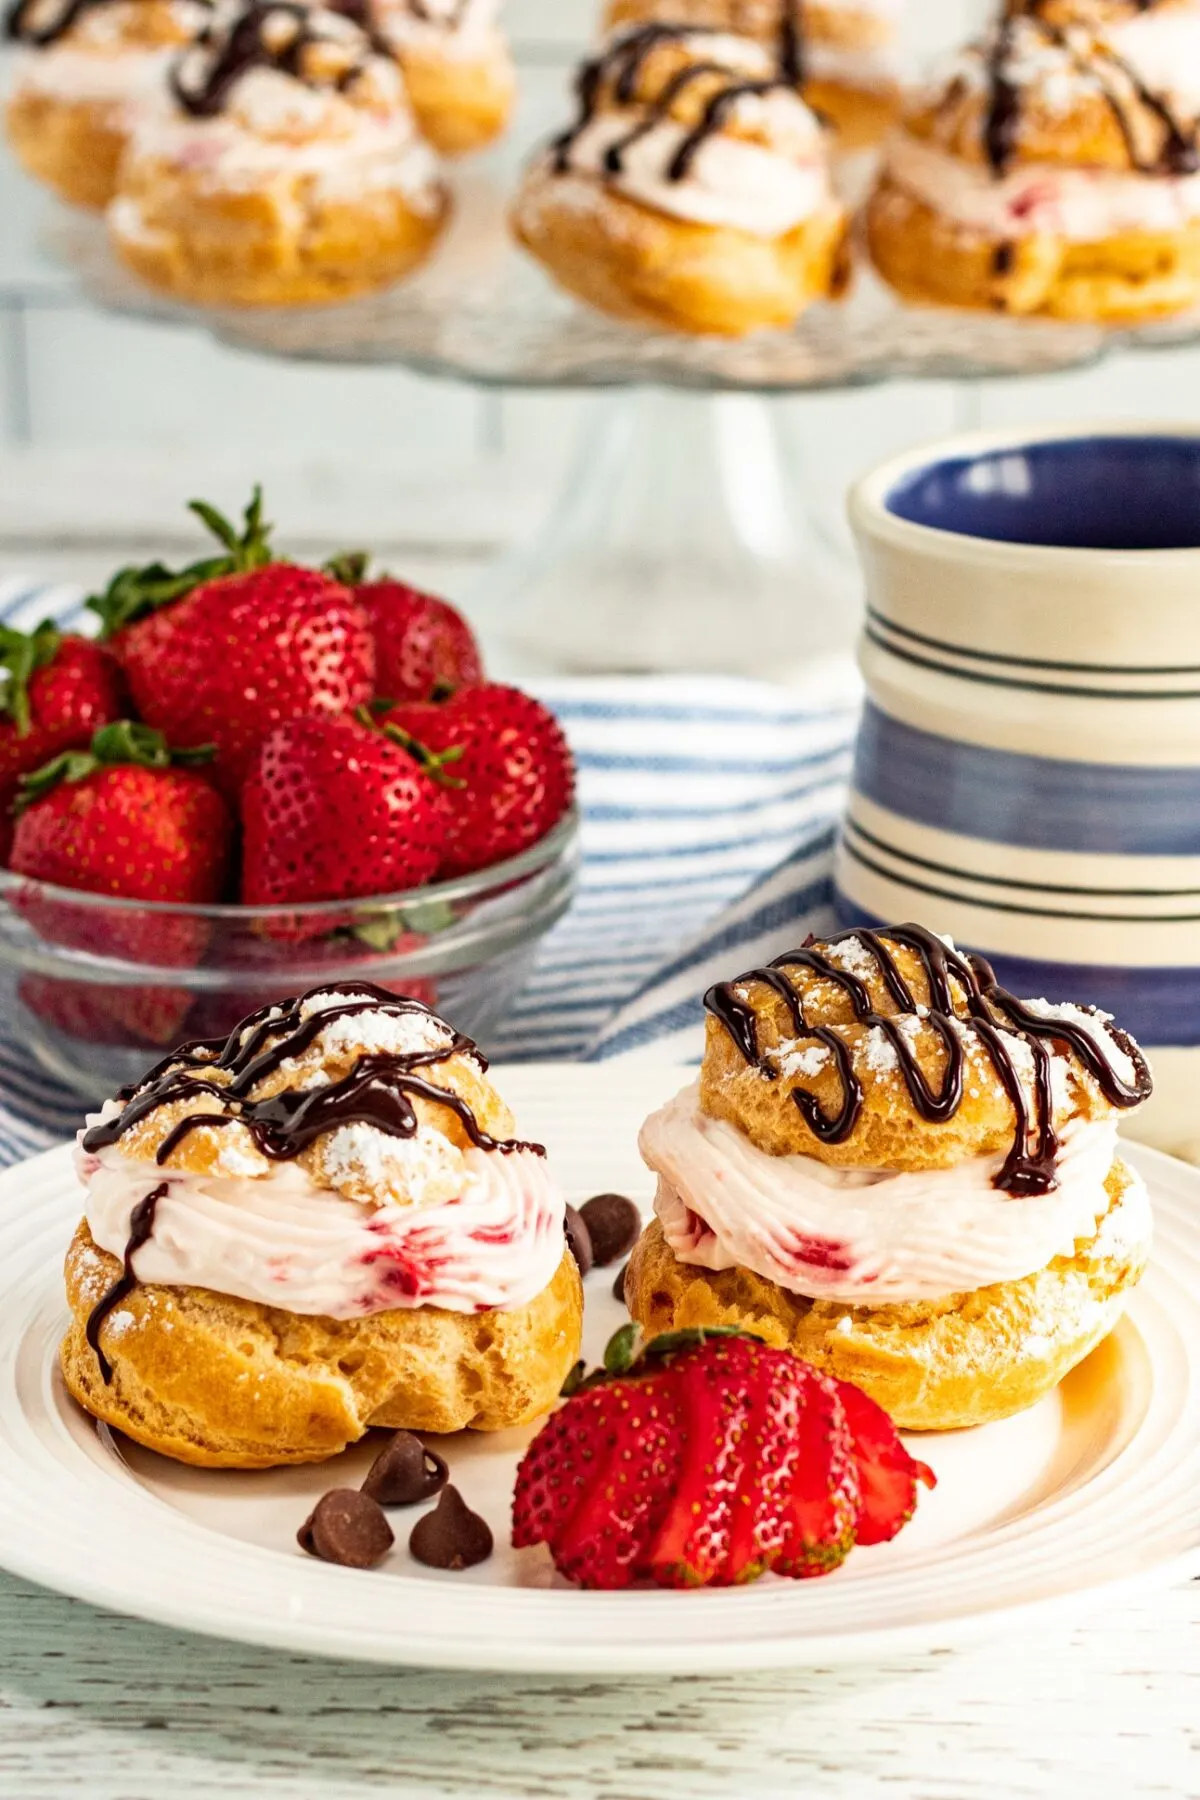 These Strawberry Cream Puffs feature a light, flaky pastry filled with strawberry whipped cream, topped with a chocolate ganache drizzle.